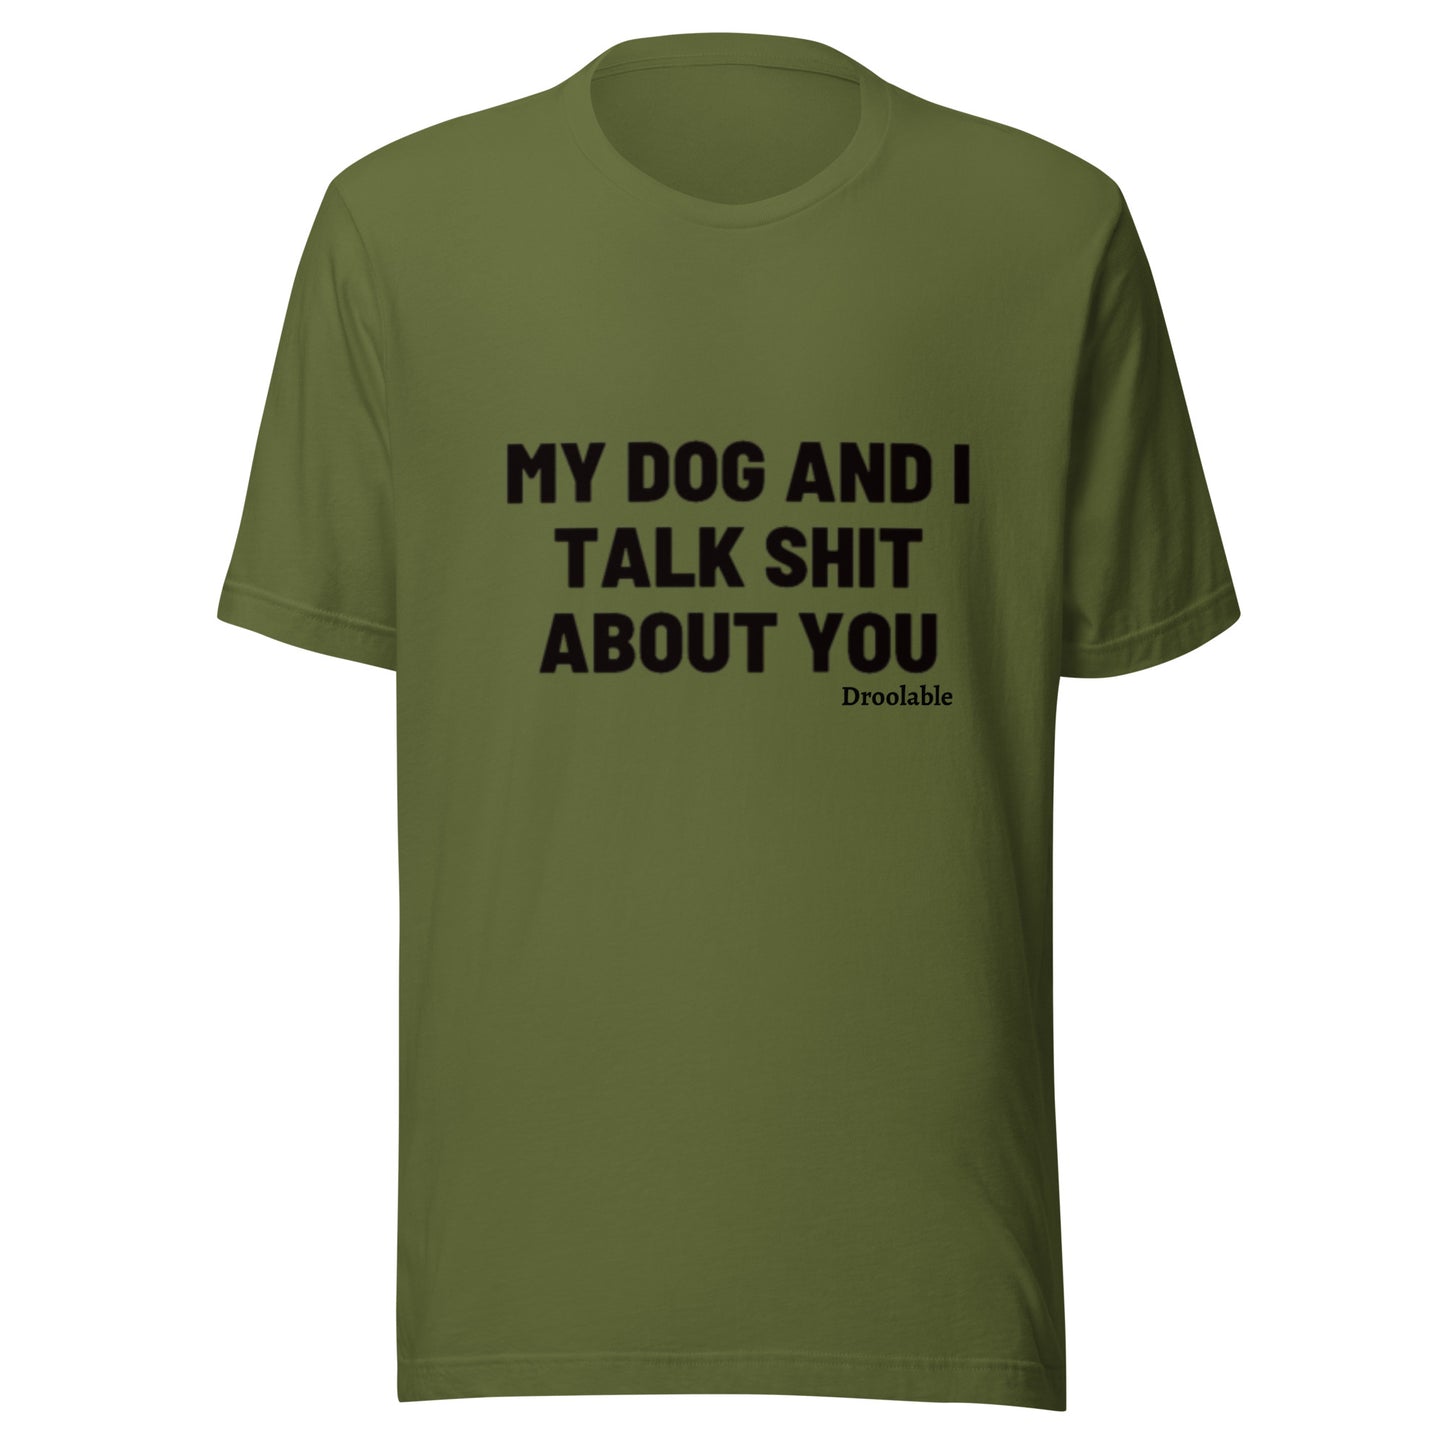 Wearables: My Dog and I Talk Shit About You T Shirt droolable